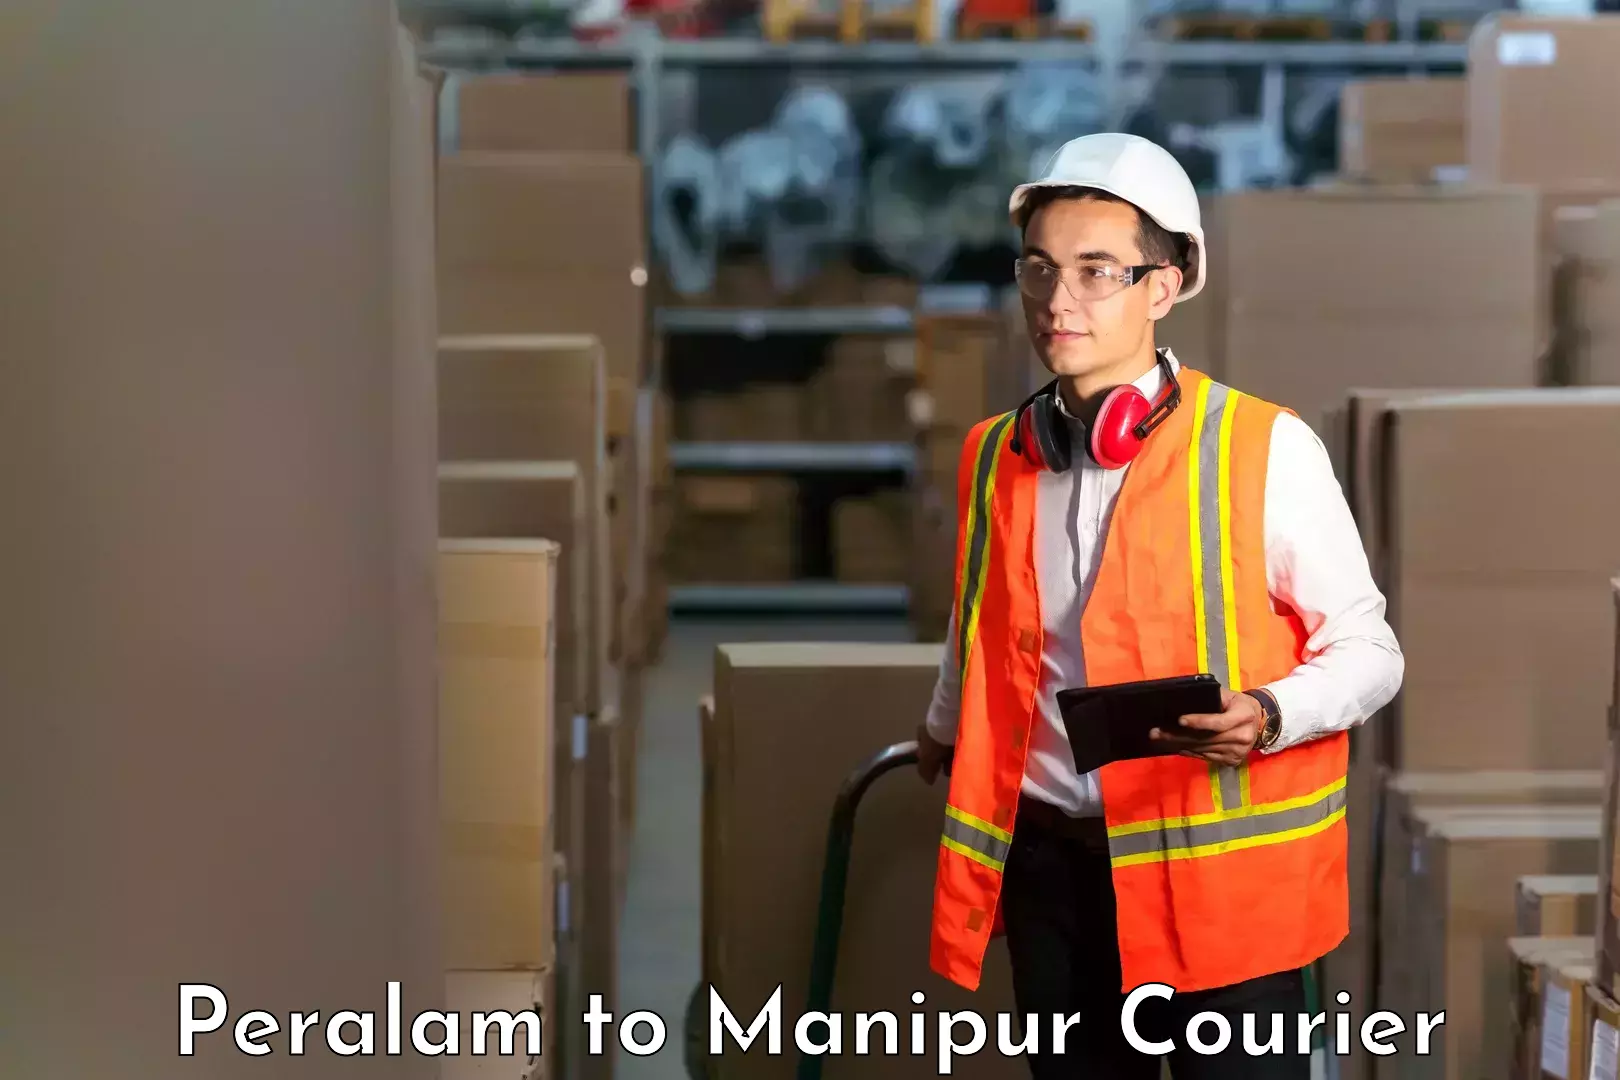 International courier networks Peralam to Manipur